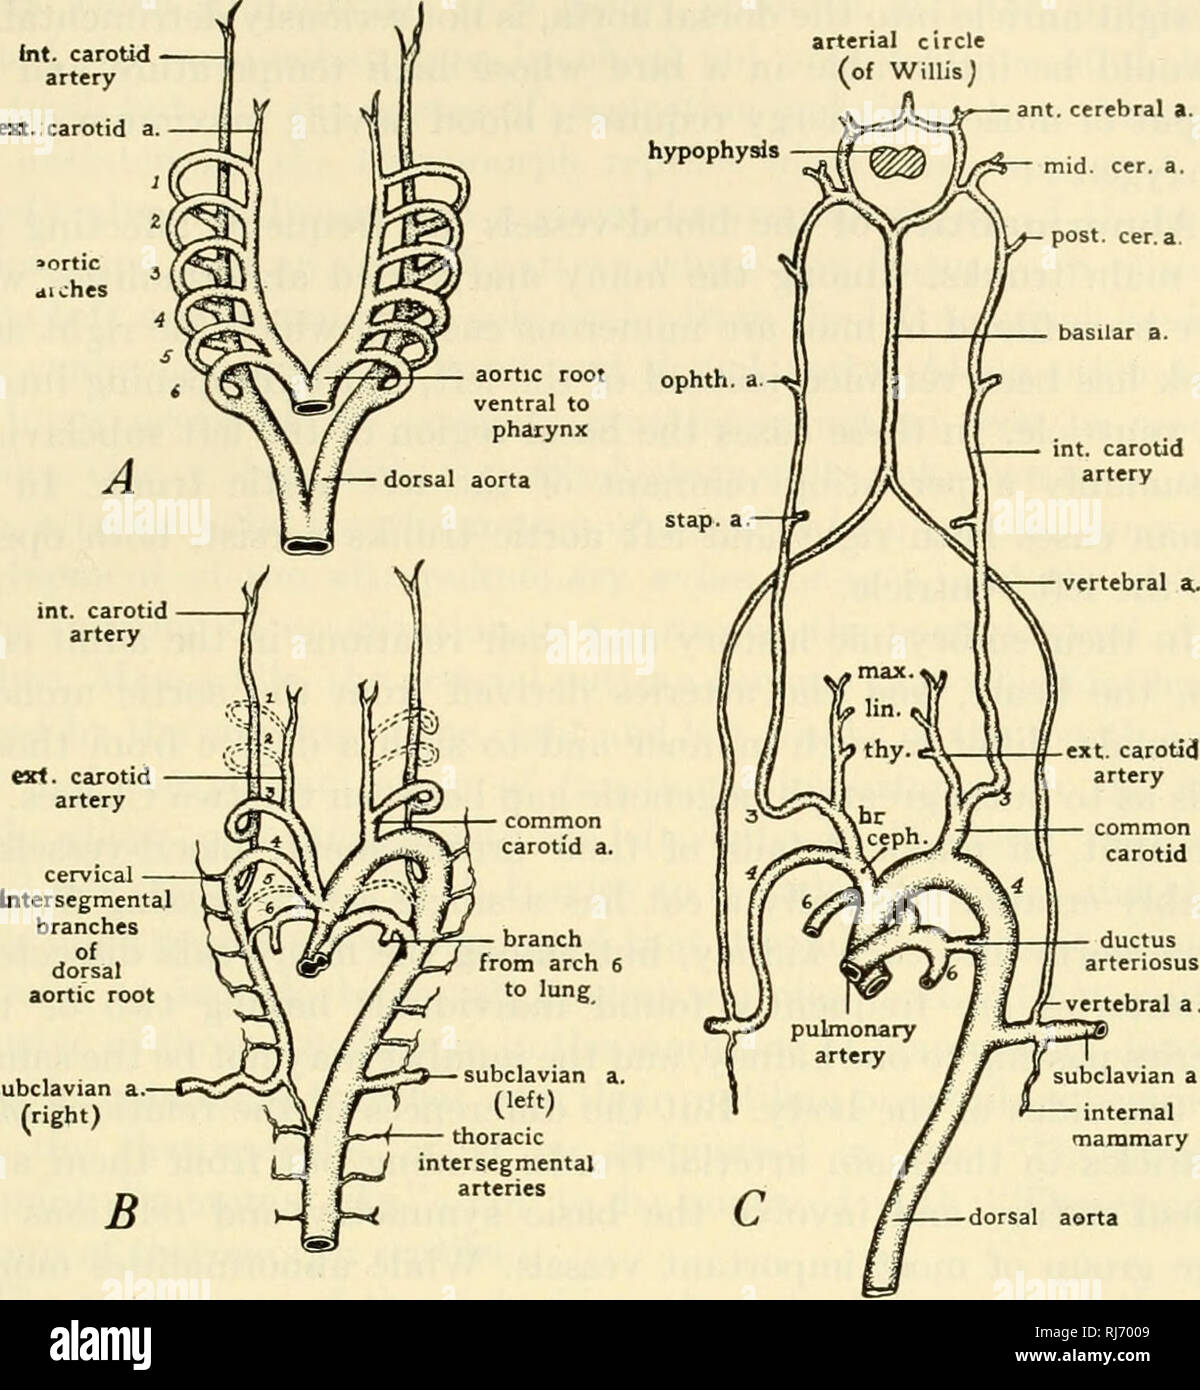 . The chordates. Chordata. Mammalia: Visceral Systems 627 arterial circle (of Willisj. subclavian a internal mammary dorsal aorta Fig. 477. Diagrams illustrating the changes which occur in the aortic arches of mammalian embryos. (A) Ground plan of complete set of aortic arches. (B) Early stage in modification of arches. (C) Derivatives of aortic arches, (br. ceph.) Brachiocephalic artery; (cer. a.) cerebral artery; (lin.) lingual artery; (max.) maxillary artery; (ophth. a.) ophthalmic artery; (stap. a.) stapedial artery; (thy.) thyroid artery. (Adapted from several sources. Courtesy, Patten: & Stock Photo